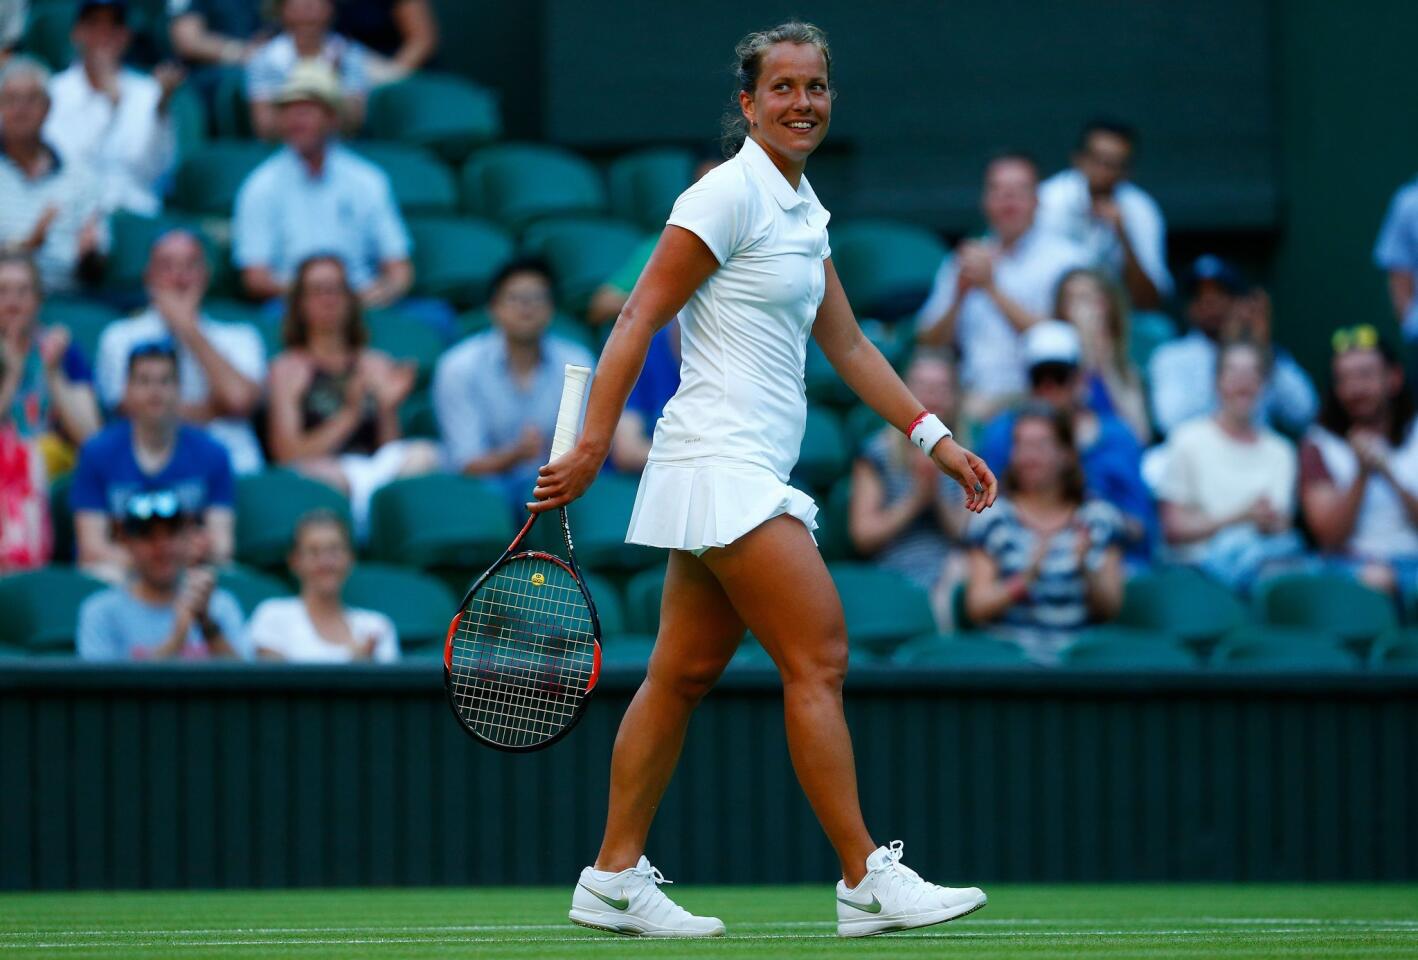 LONDON, ENGLAND - JUNE 29: Barbara Strycova of the Czech Republic reacts in her Ladies Singles first round match against Sloane Stephens of the United States during day one of the Wimbledon Lawn Tennis Championships at the All England Lawn Tennis and Croquet Club on June 29, 2015 in London, England. (Photo by Julian Finney/Getty Images) ** OUTS - ELSENT, FPG - OUTS * NM, PH, VA if sourced by CT, LA or MoD **